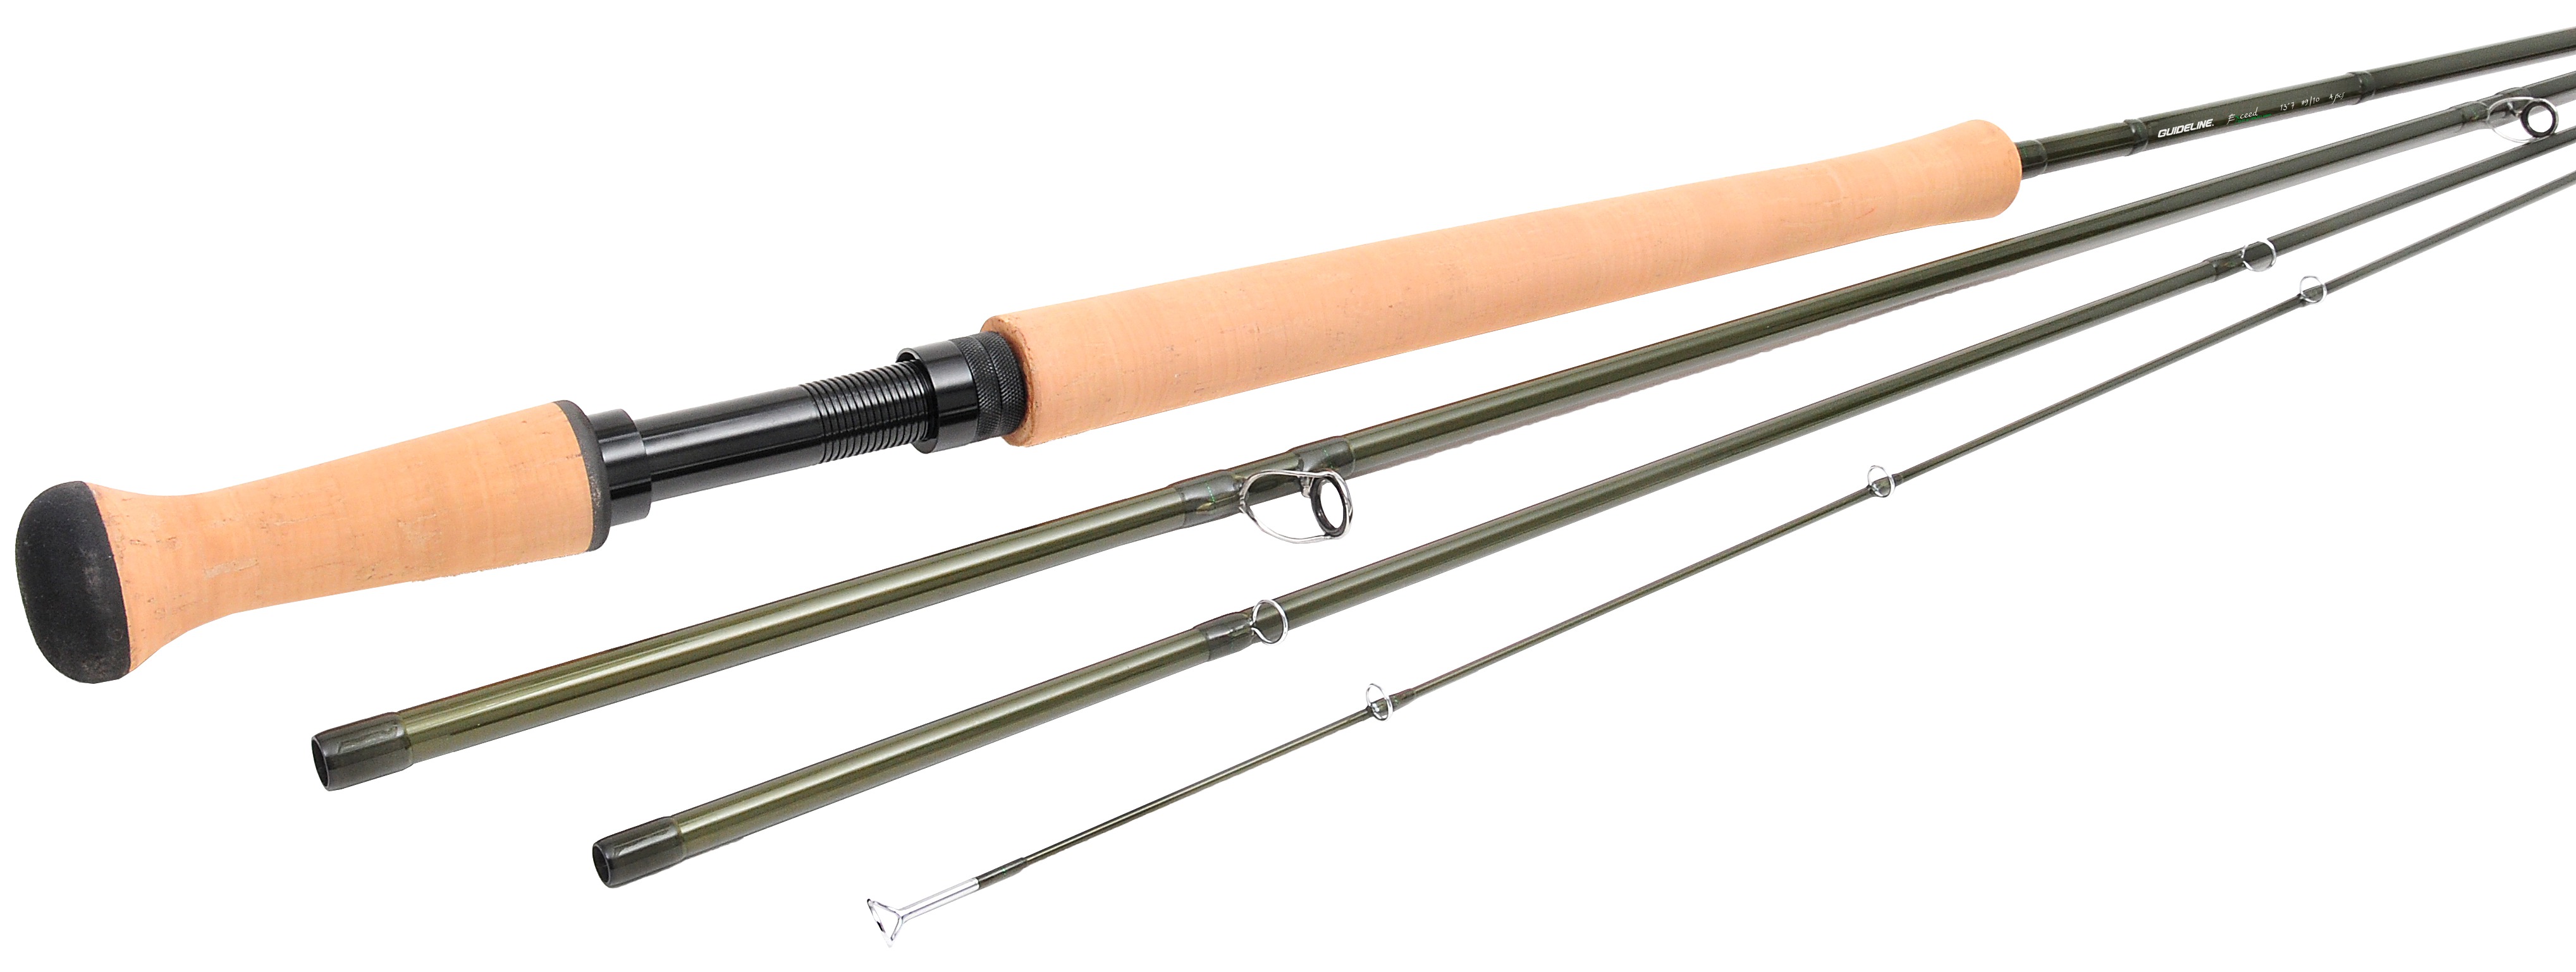 Trout and Salmon Magazine - 14ft Salmon Rod Review